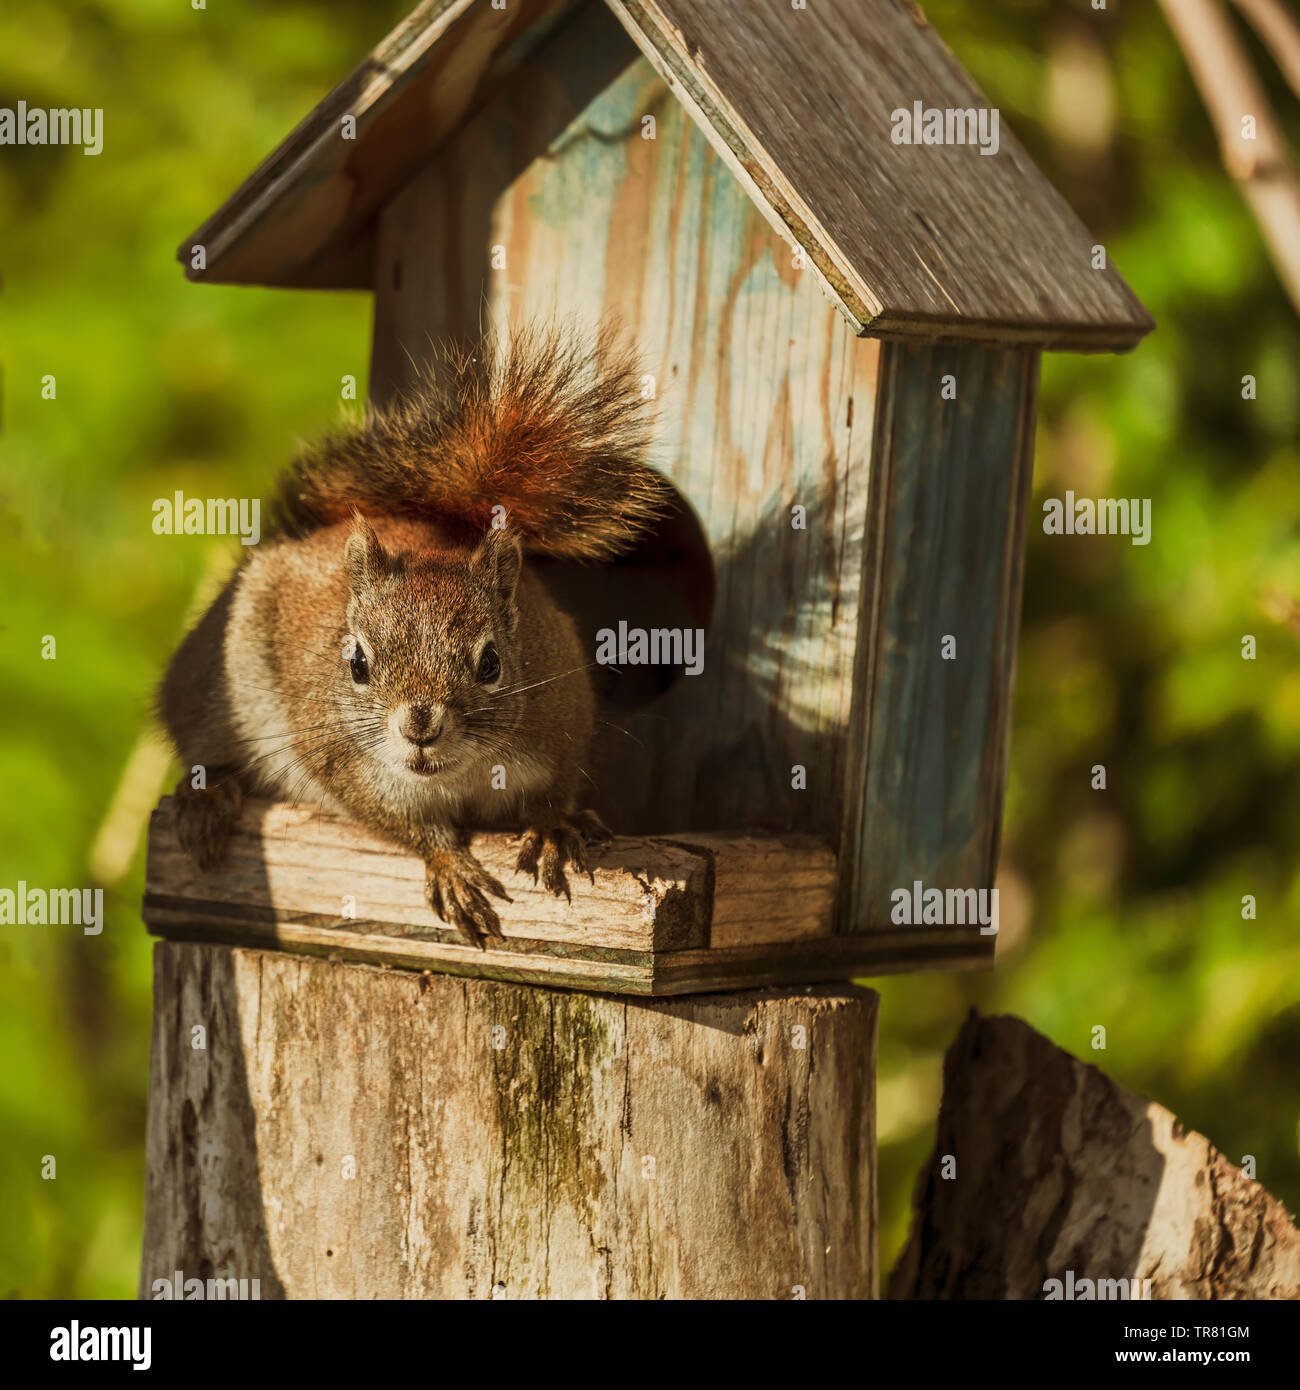 American red squirrel feasting at a bird feeder. Stock Photo